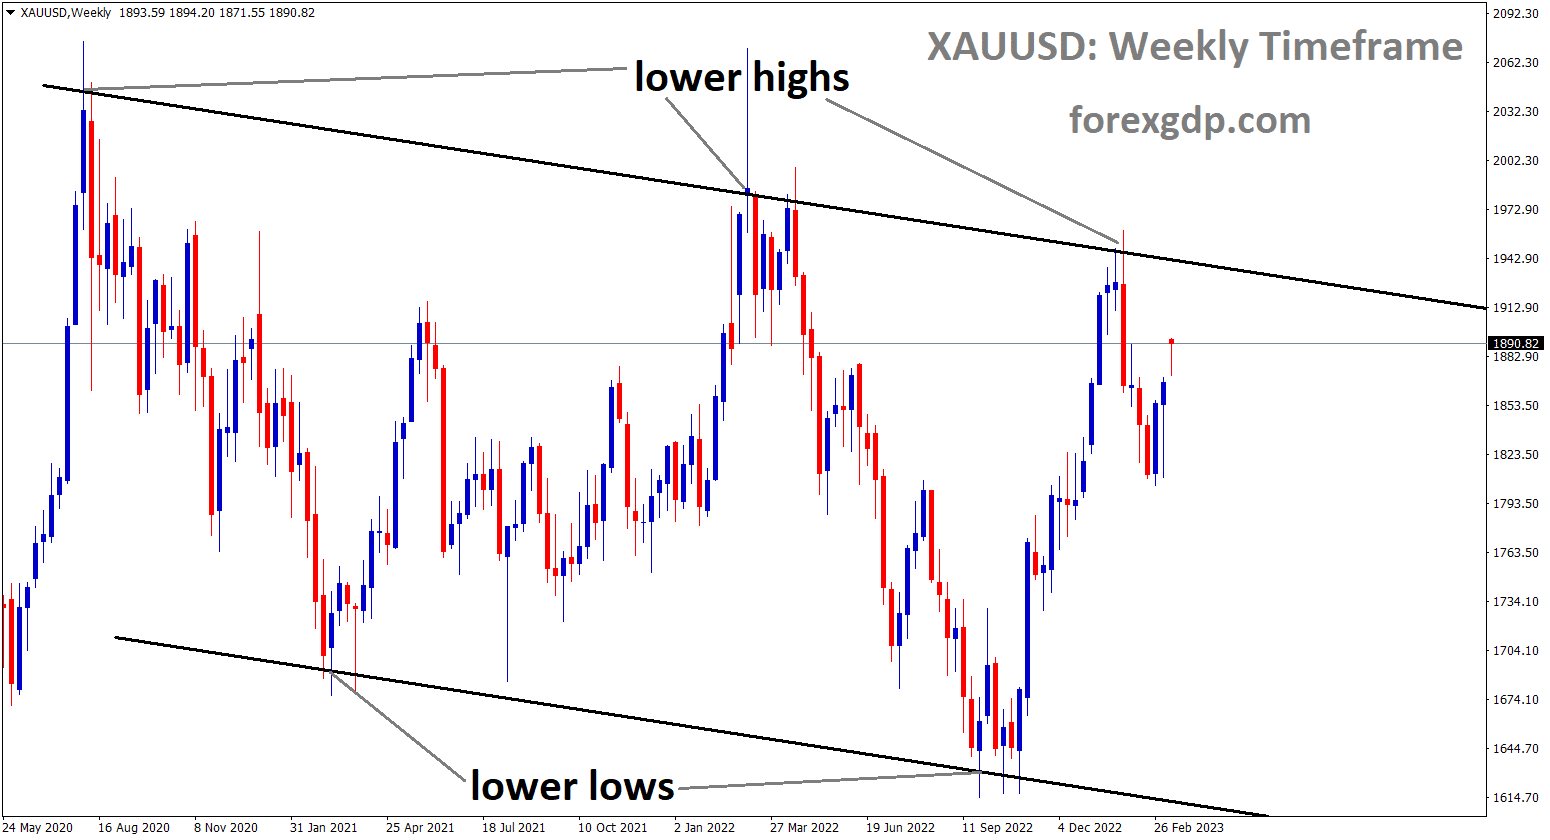 XAUUSD is moving in Descending channel and the market has reached the lower high area of the channel. 1